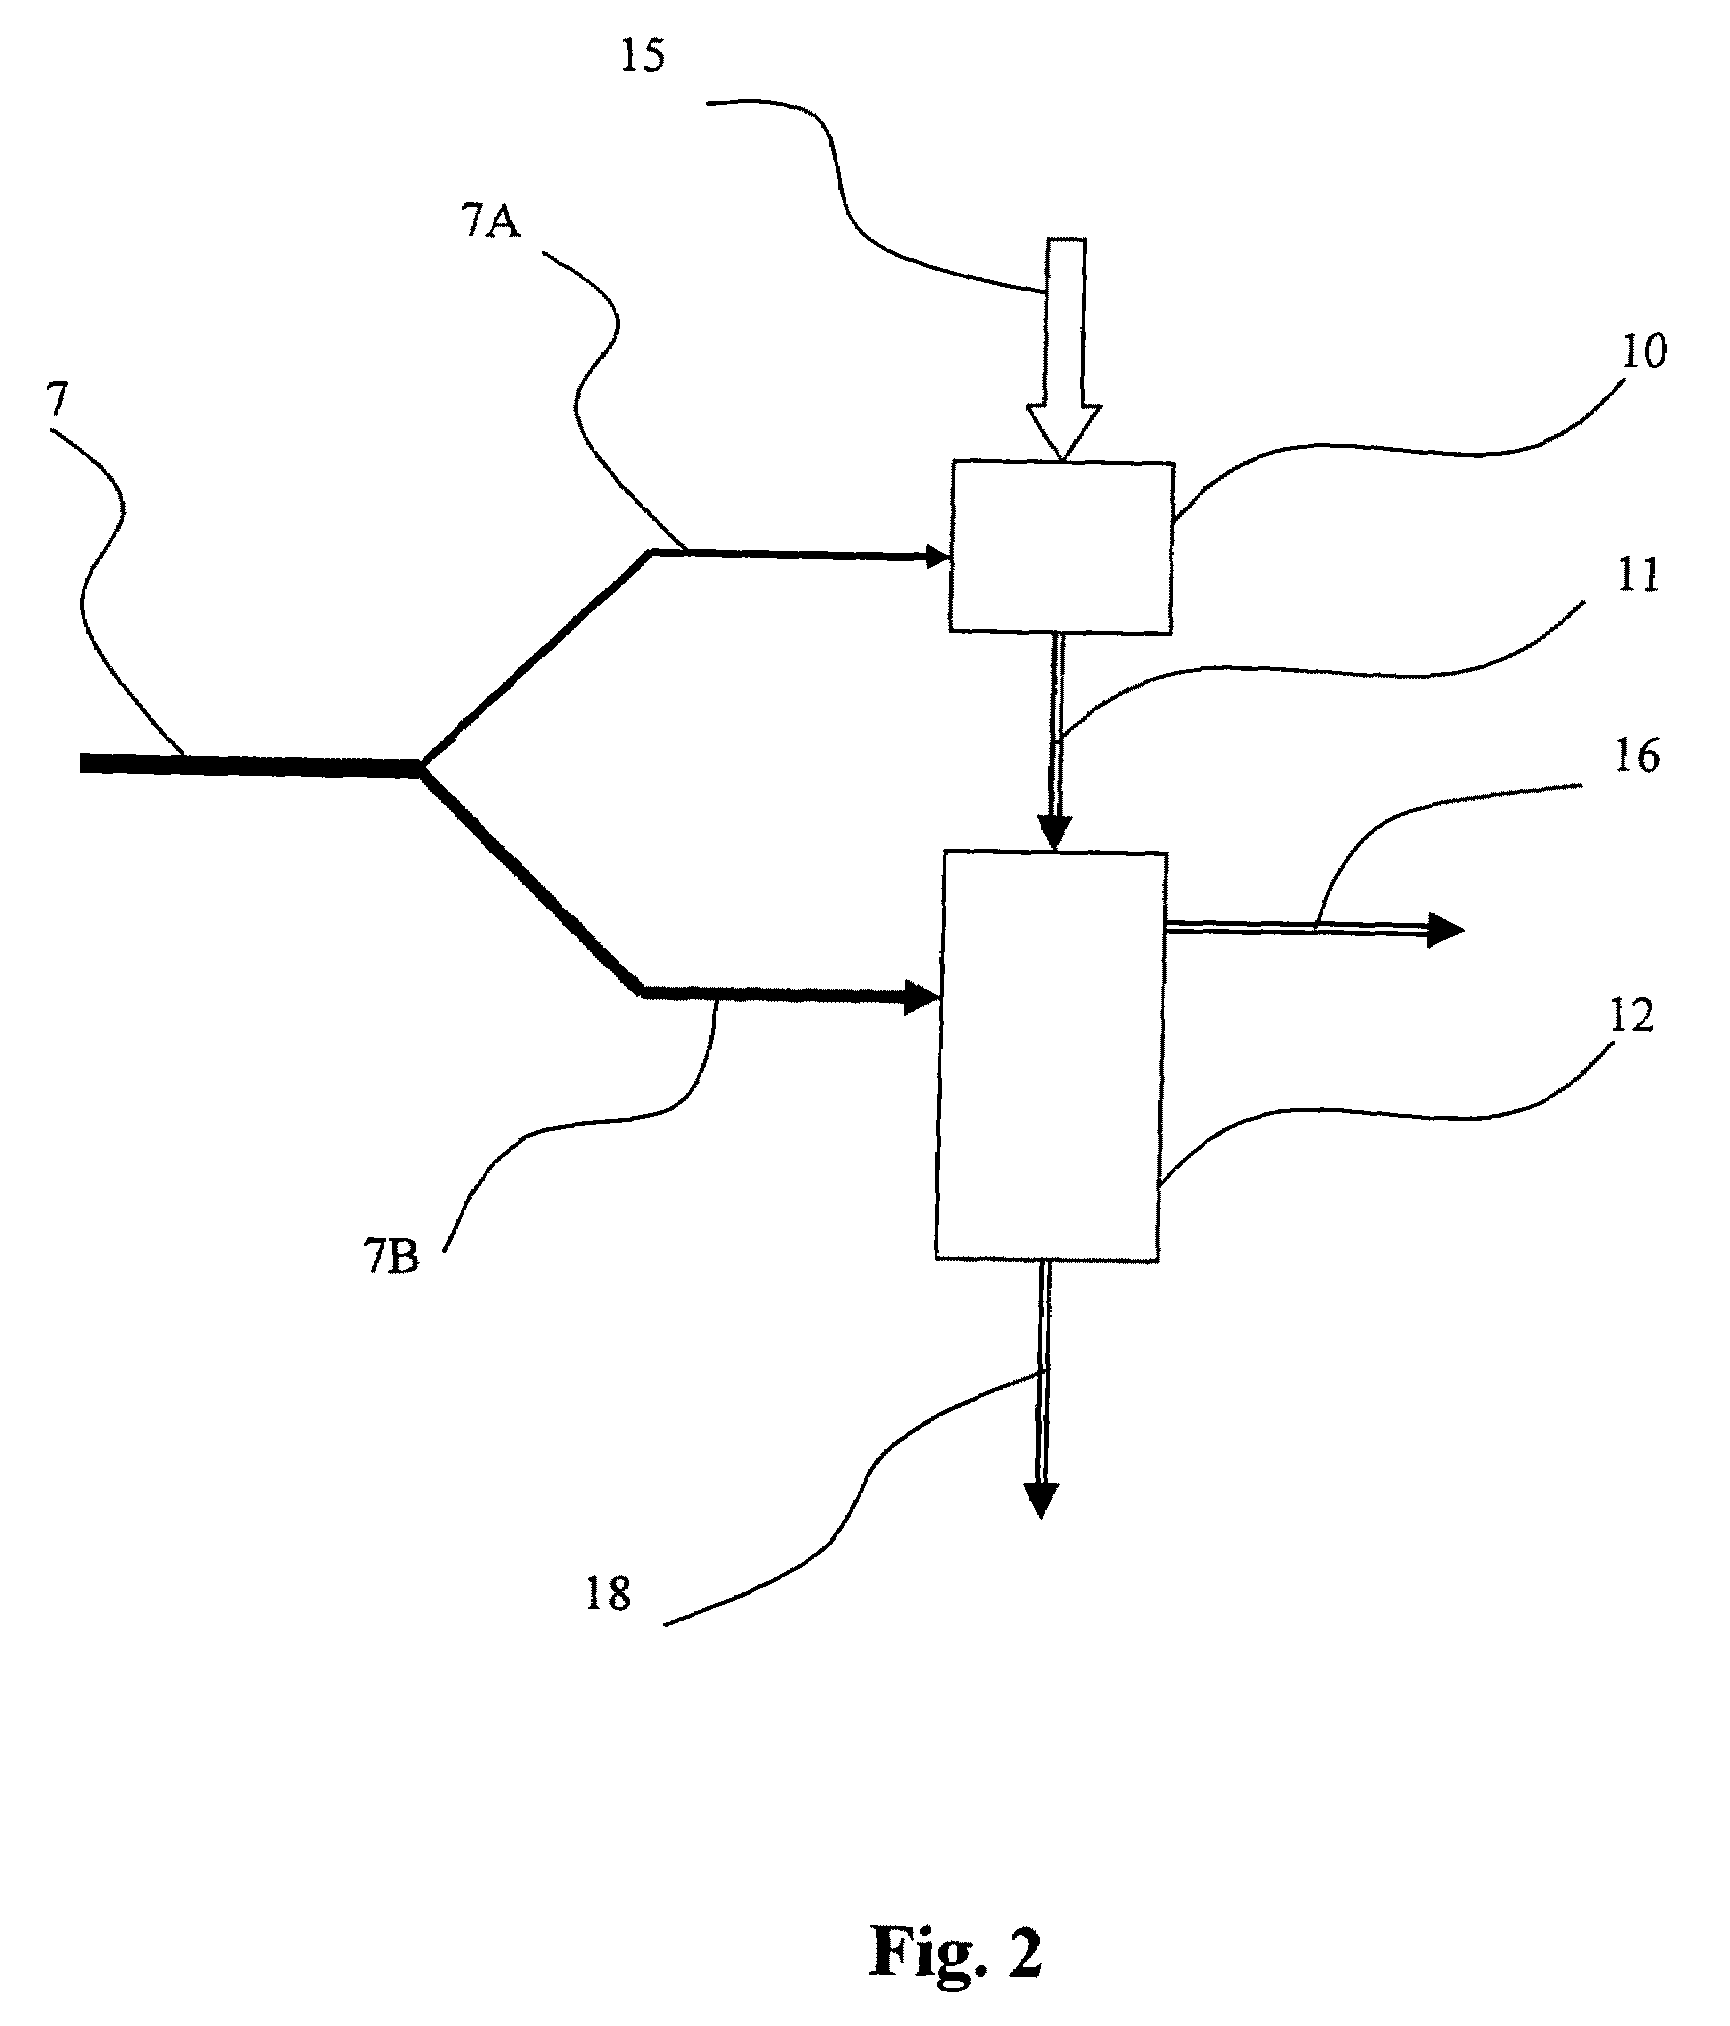 Apparatus for hydrogen and carbon production via carbon aerosol-catalyzed dissociation of hydrocarbons